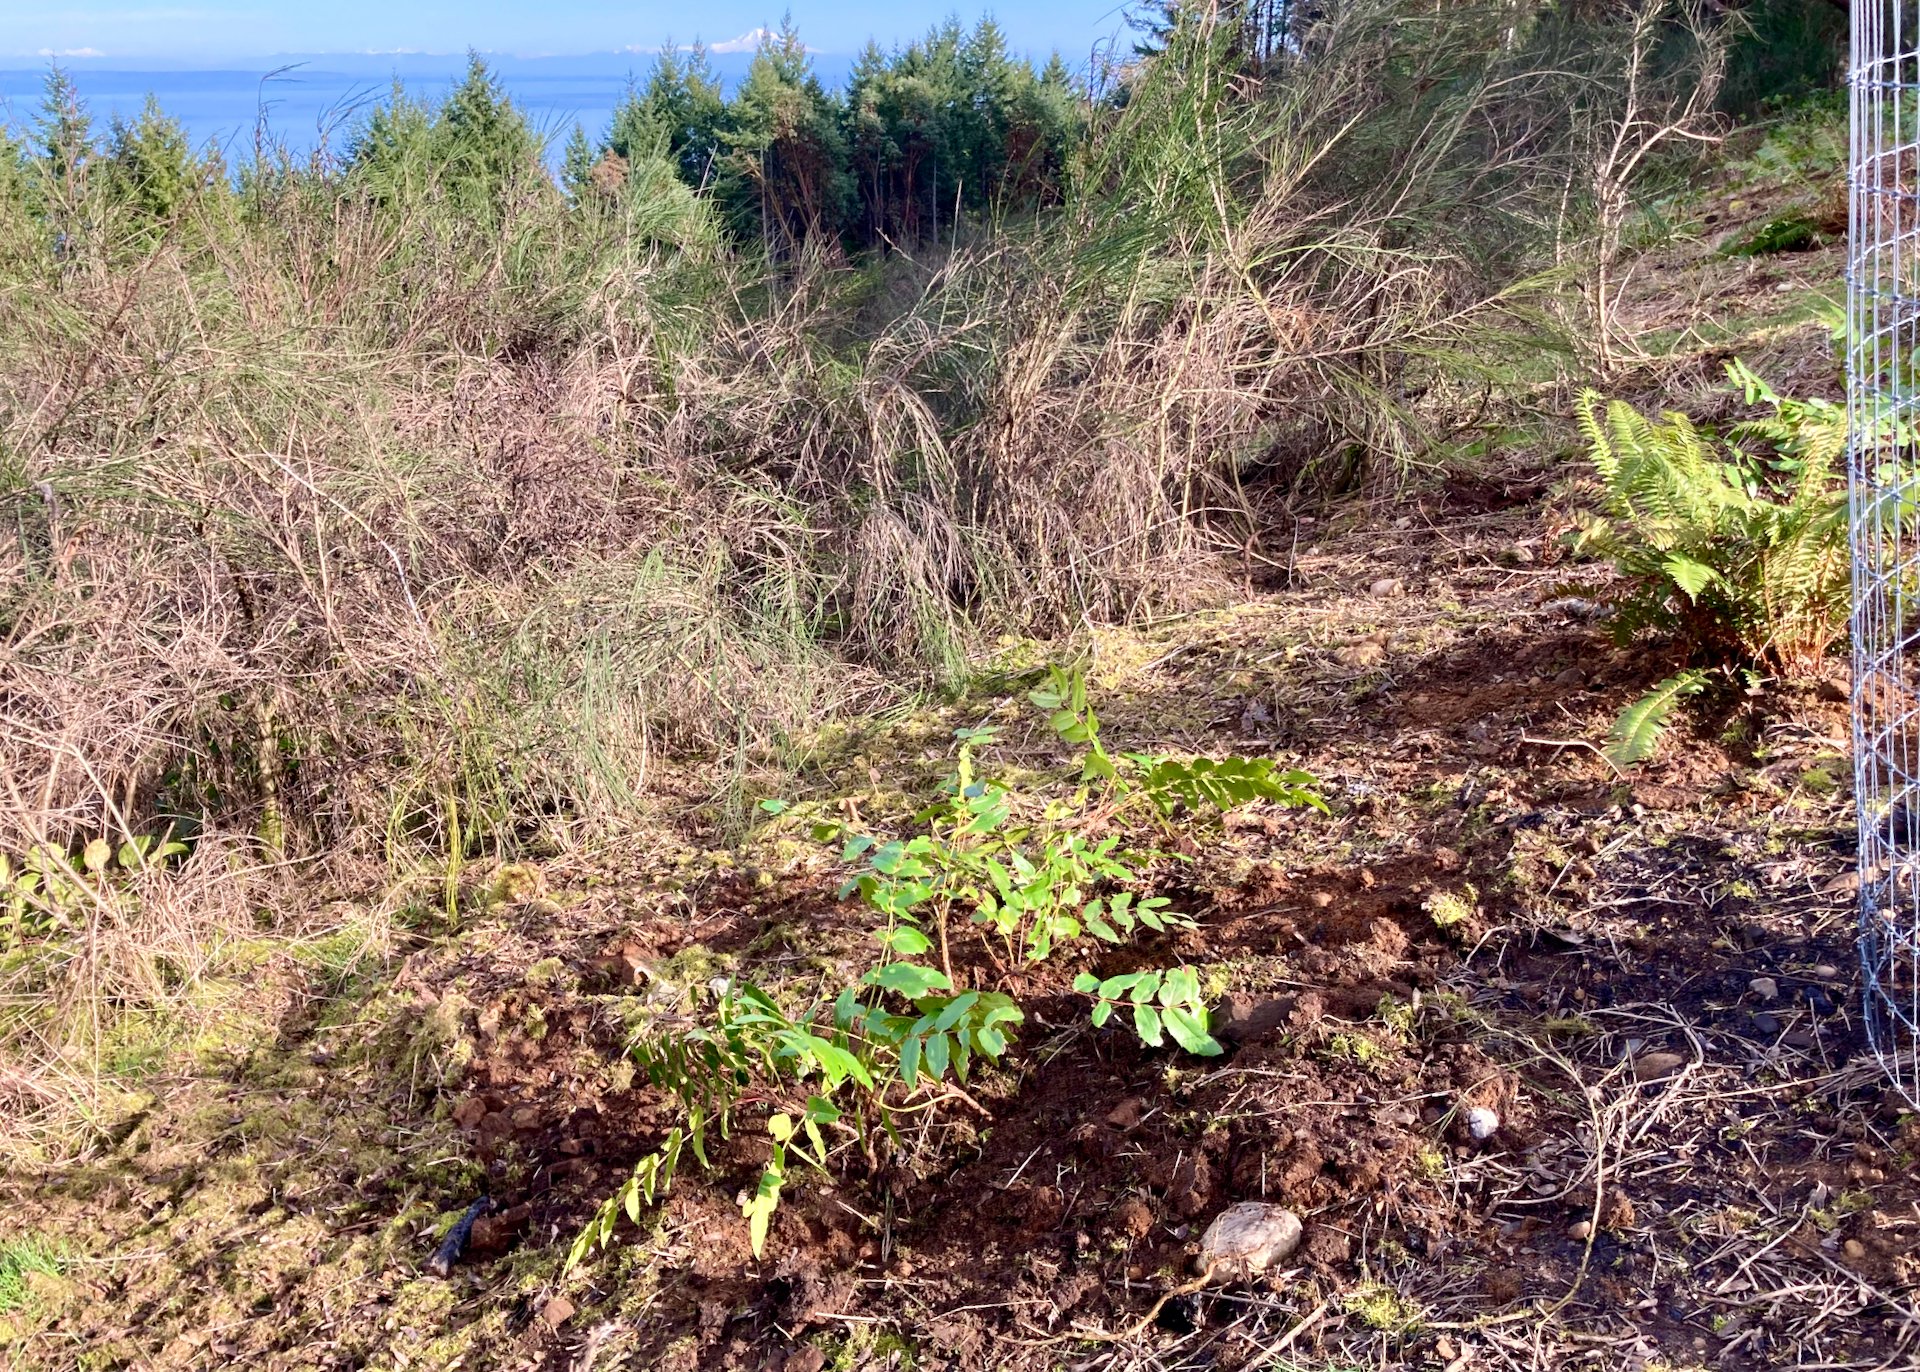  We’ve transplanted Oregon grape from our neighbors property where they are clearing land to build their cottage.  